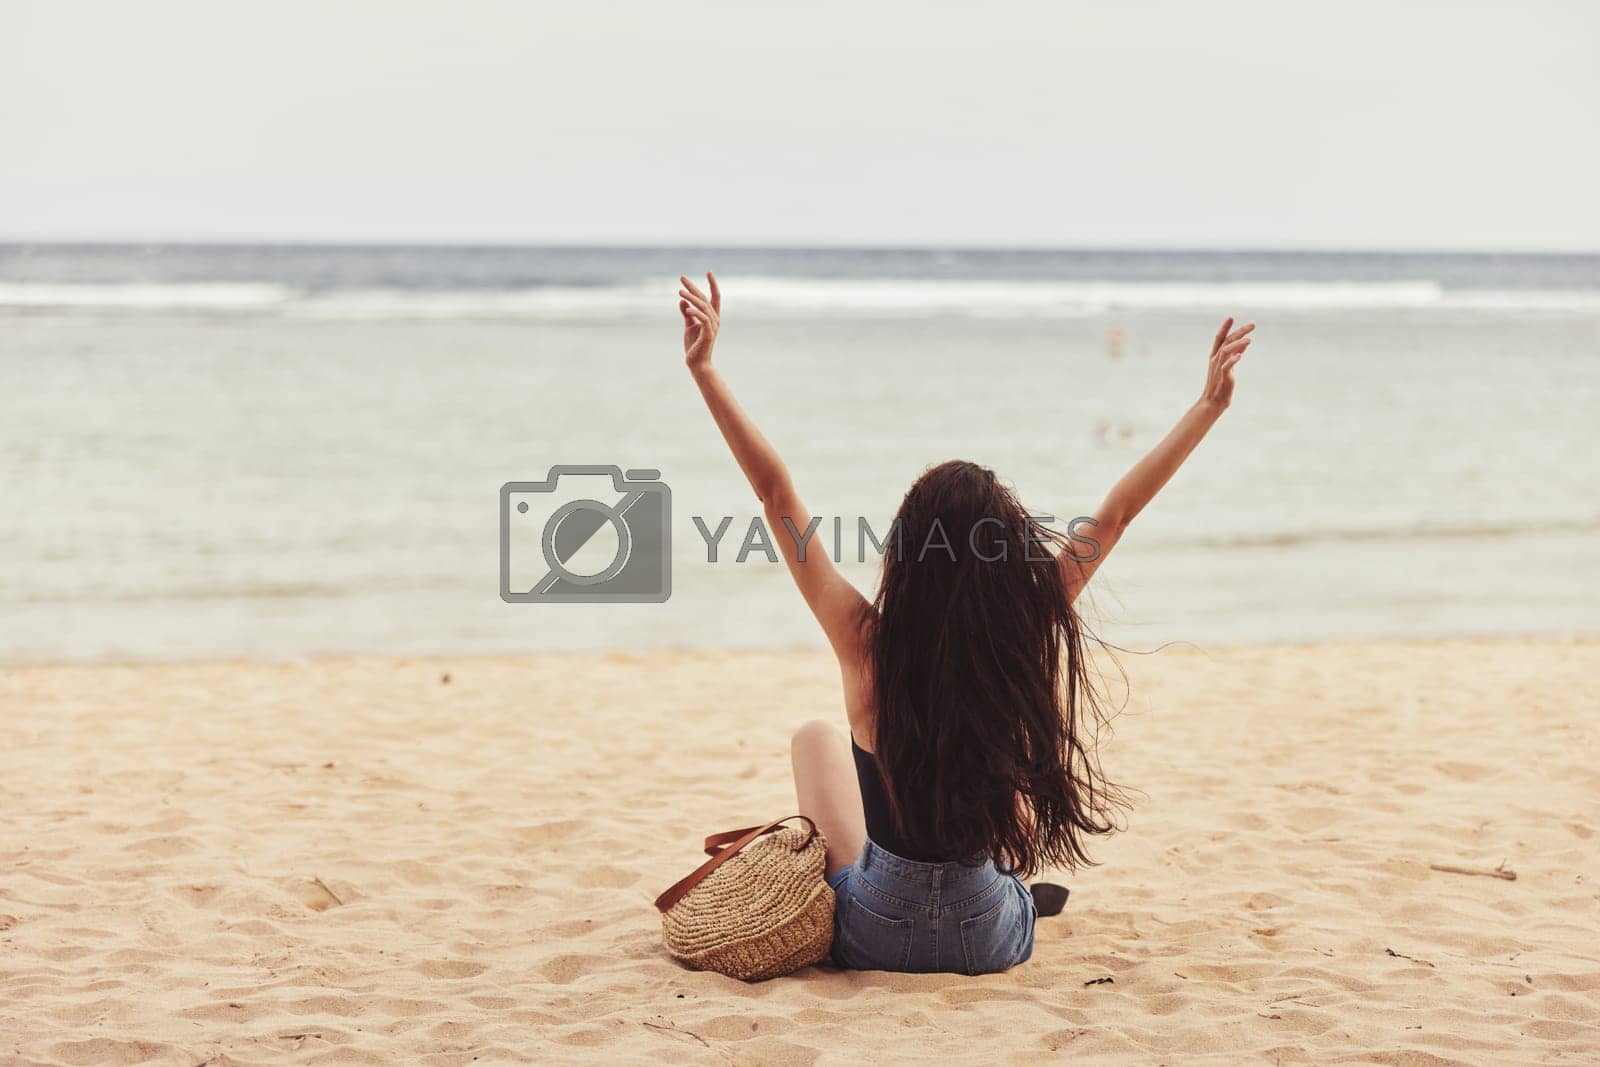 Royalty free image of sea woman nature vacation attractive smile sitting beach sand freedom travel by SHOTPRIME